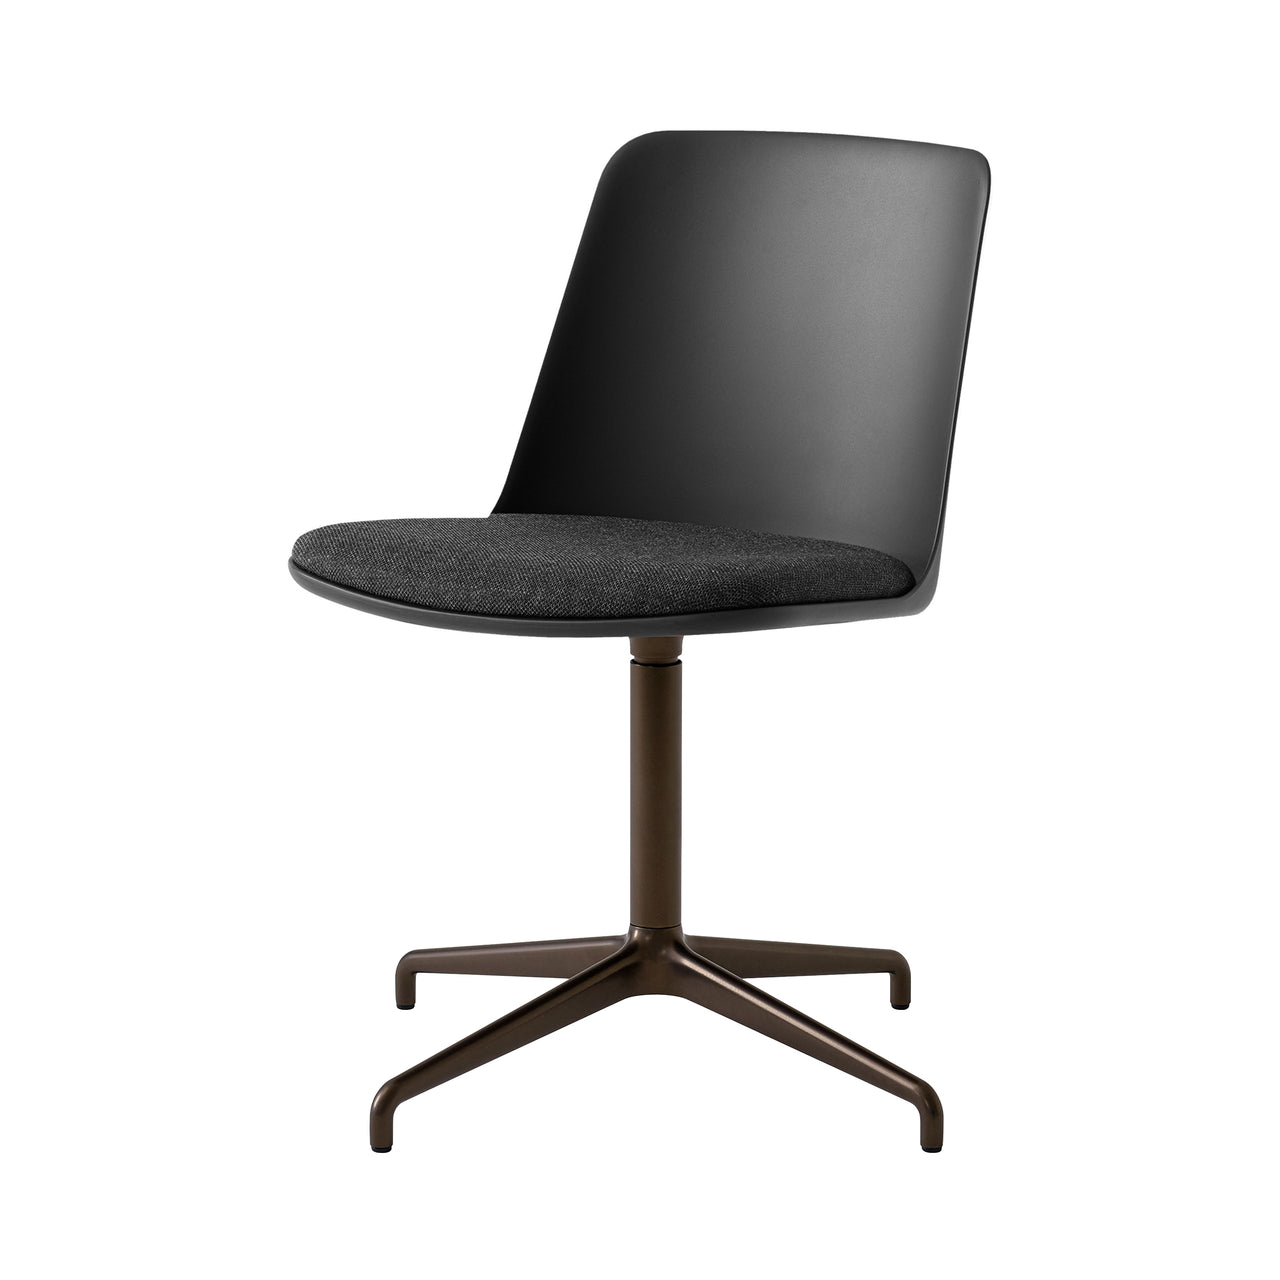 Rely Chair HW17: Black + Bronzed